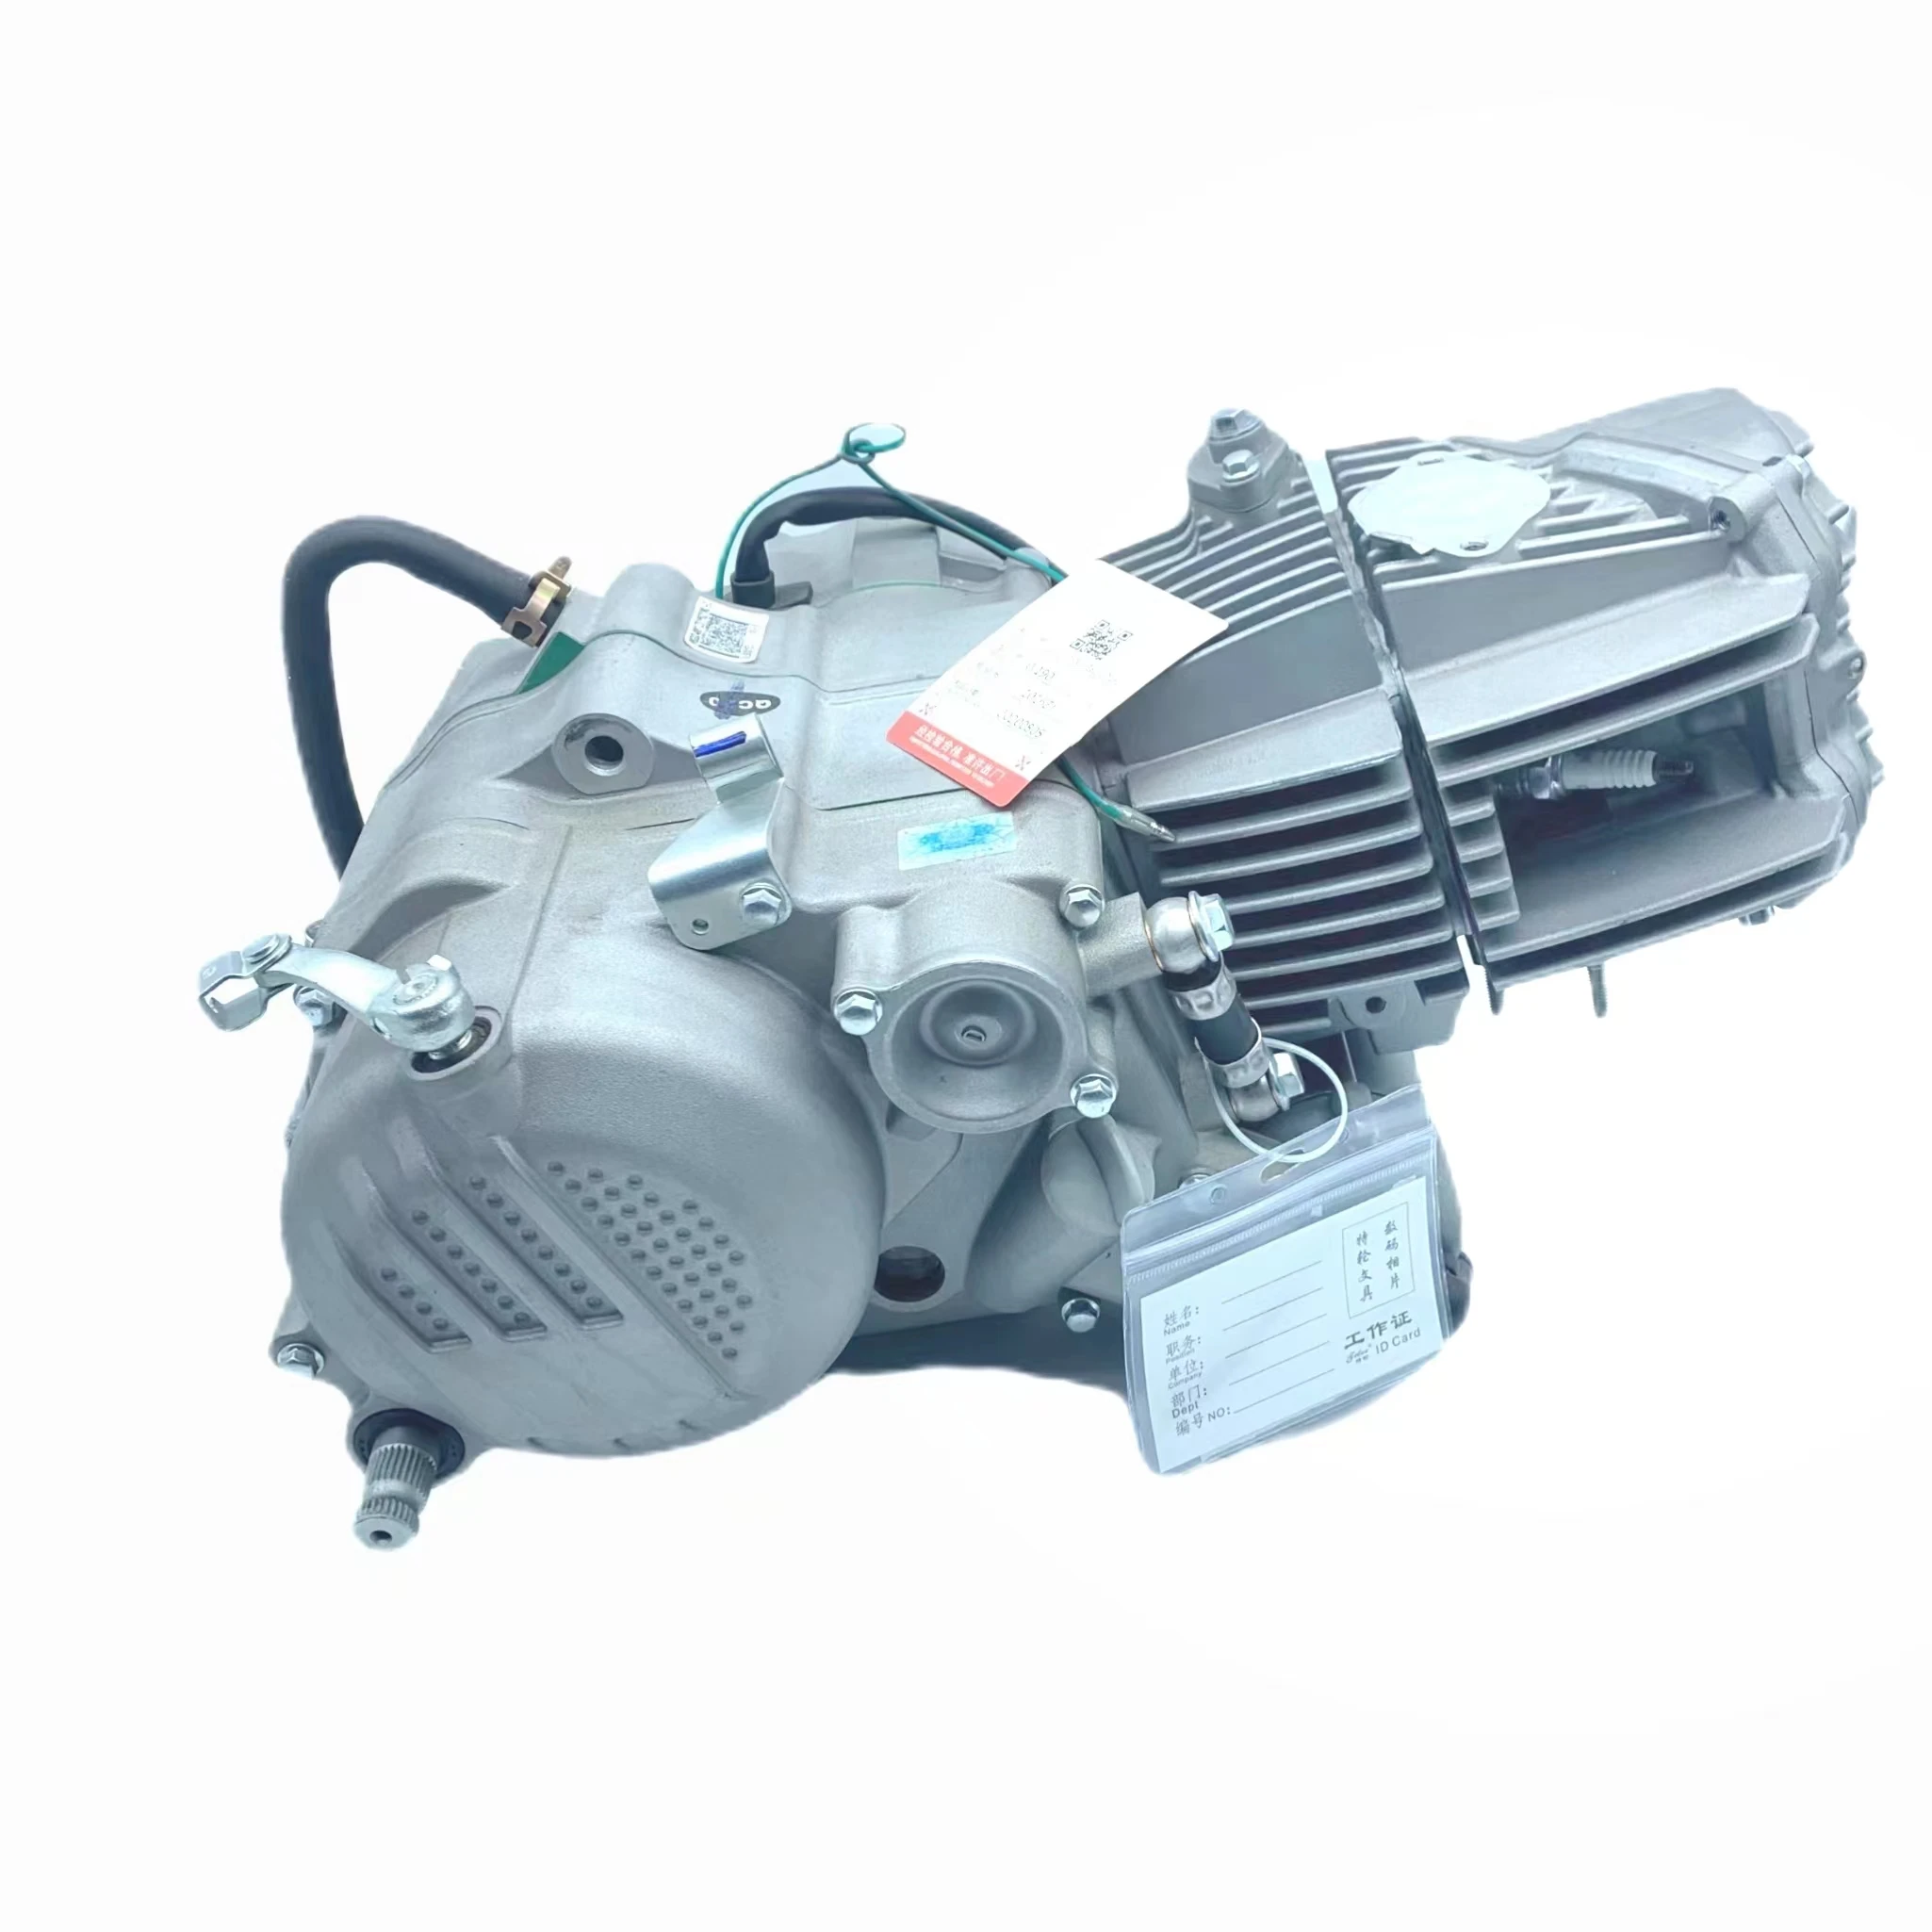 OEM factory sells Zongshen W190 engine Zongshen W190cc horizontal is suitable for modified off-road motorcycles Engine assembly